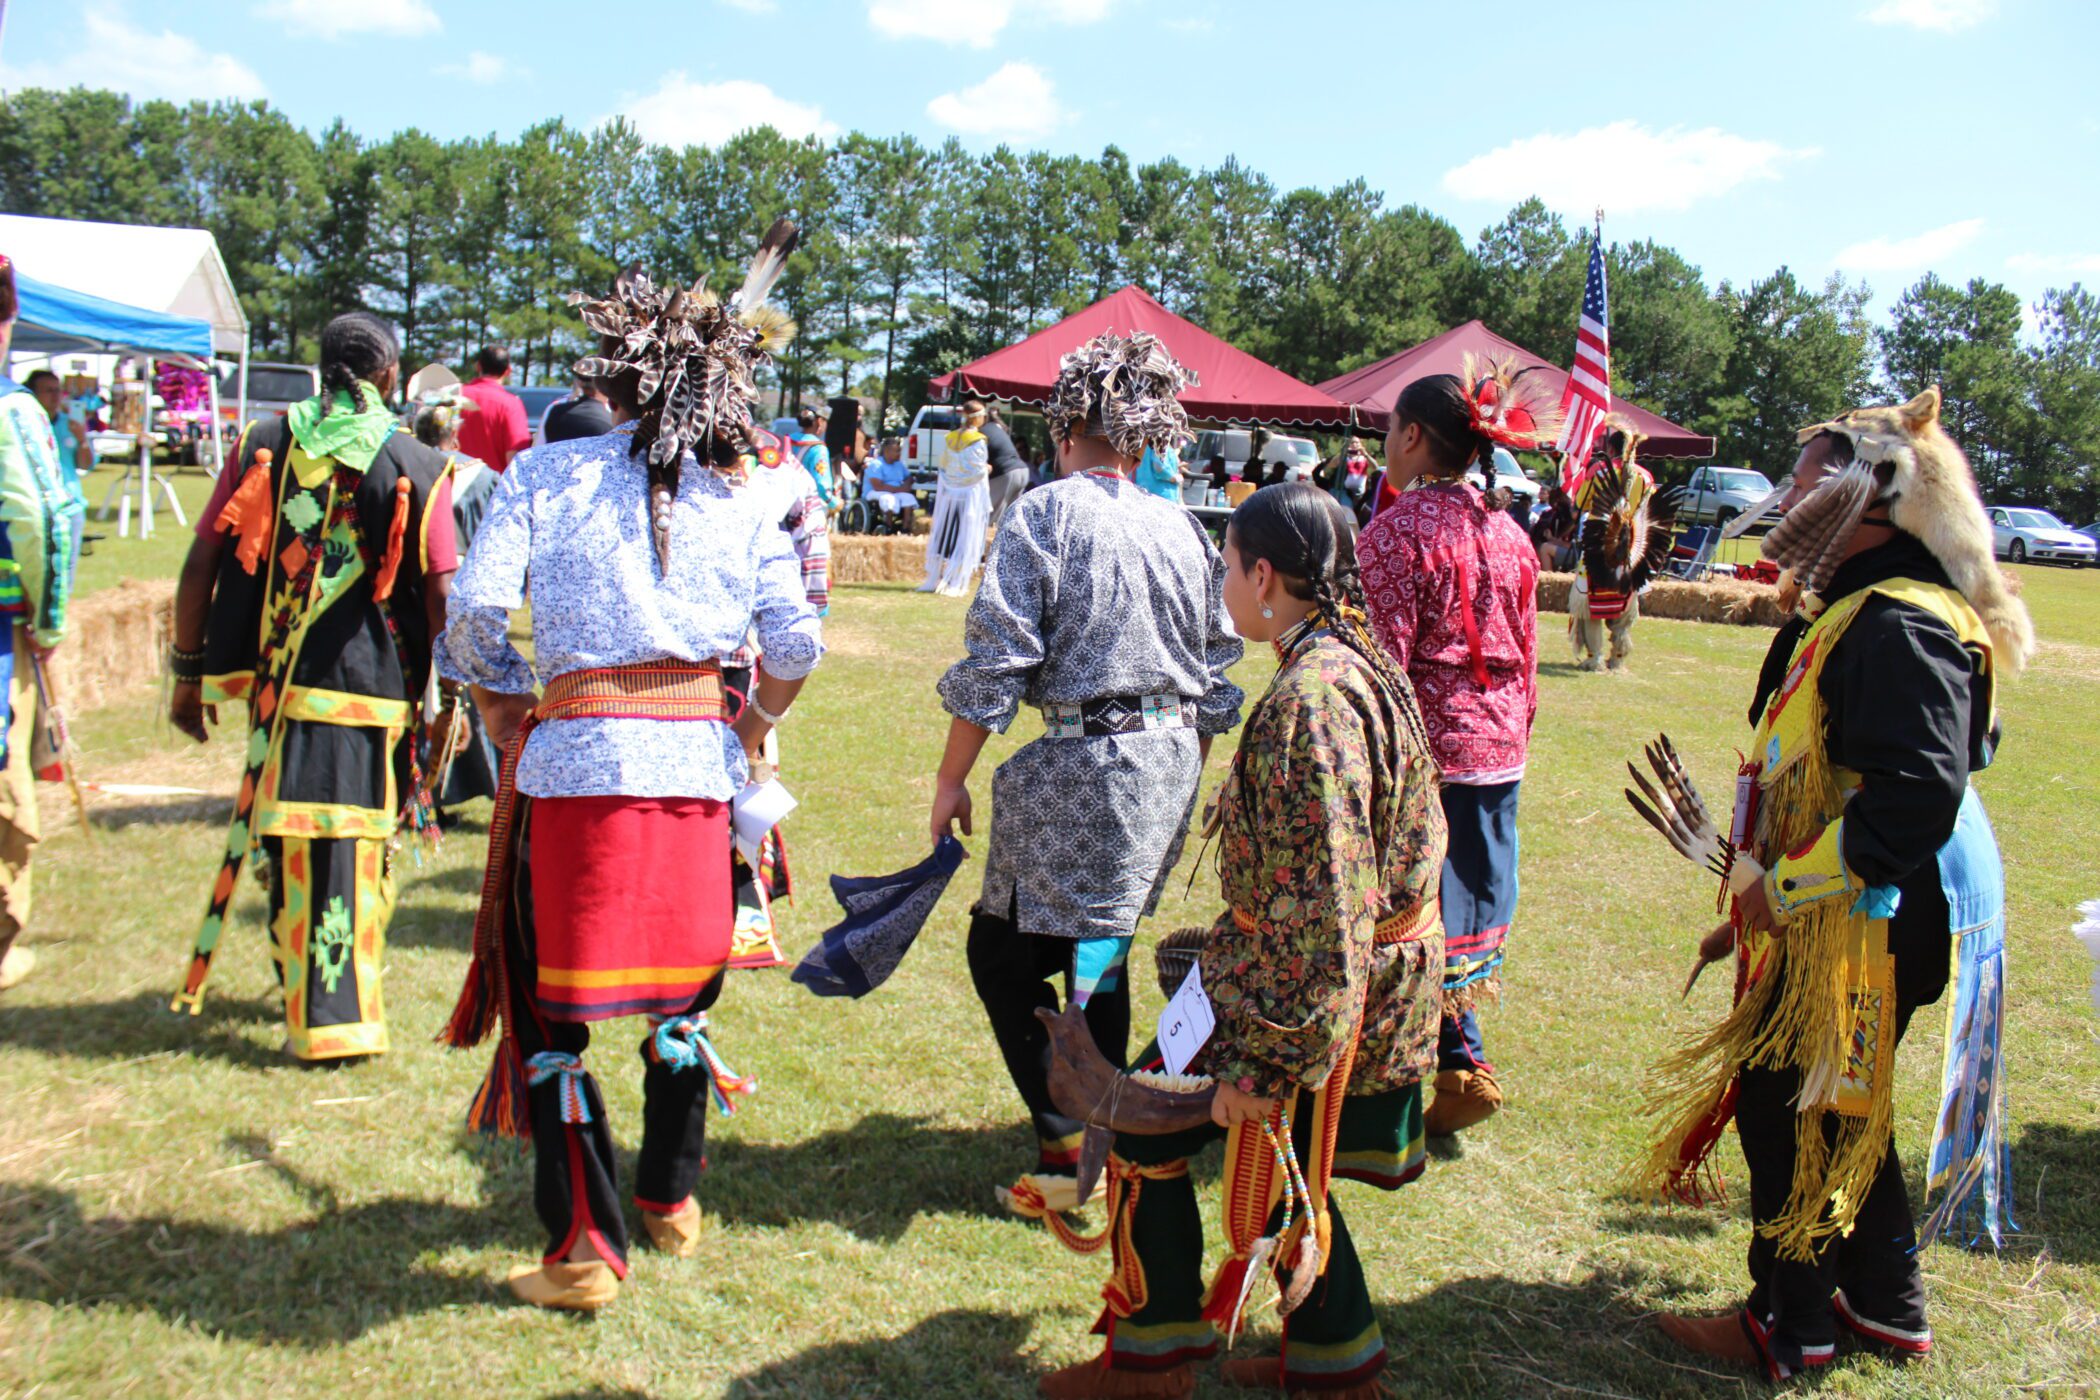 Several Lumbee Tribe members dance dressed in traditional garb at the Lumbee Tribe POWWOW in Lumberton, North Carolina.